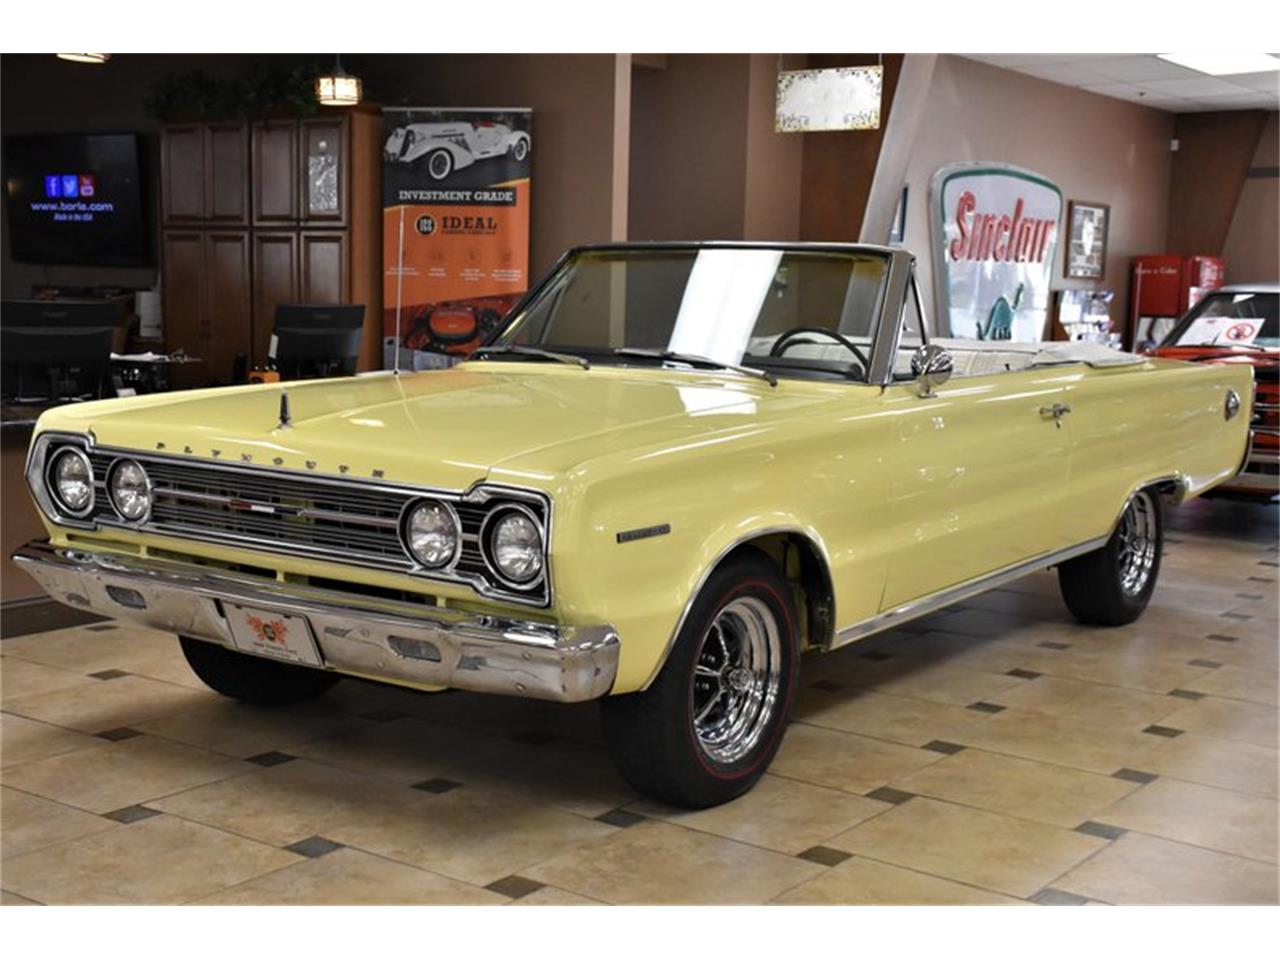 Phil Are Go!: '67 Plymouth Belvedere - A better Belvederriere